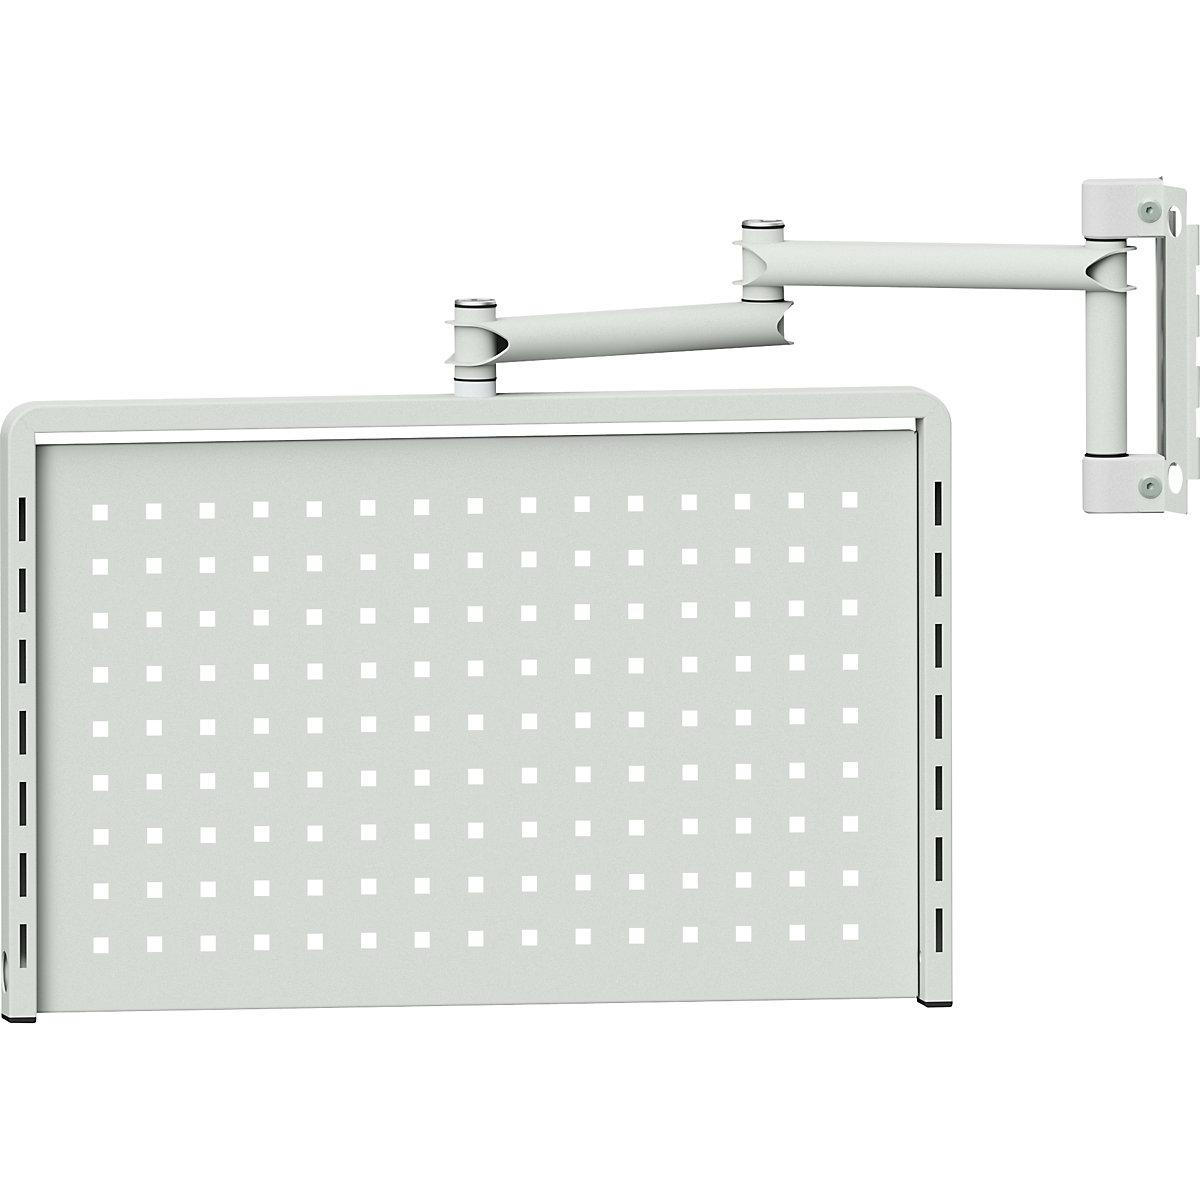 ANKE – Perforated panel for swivelling base frame